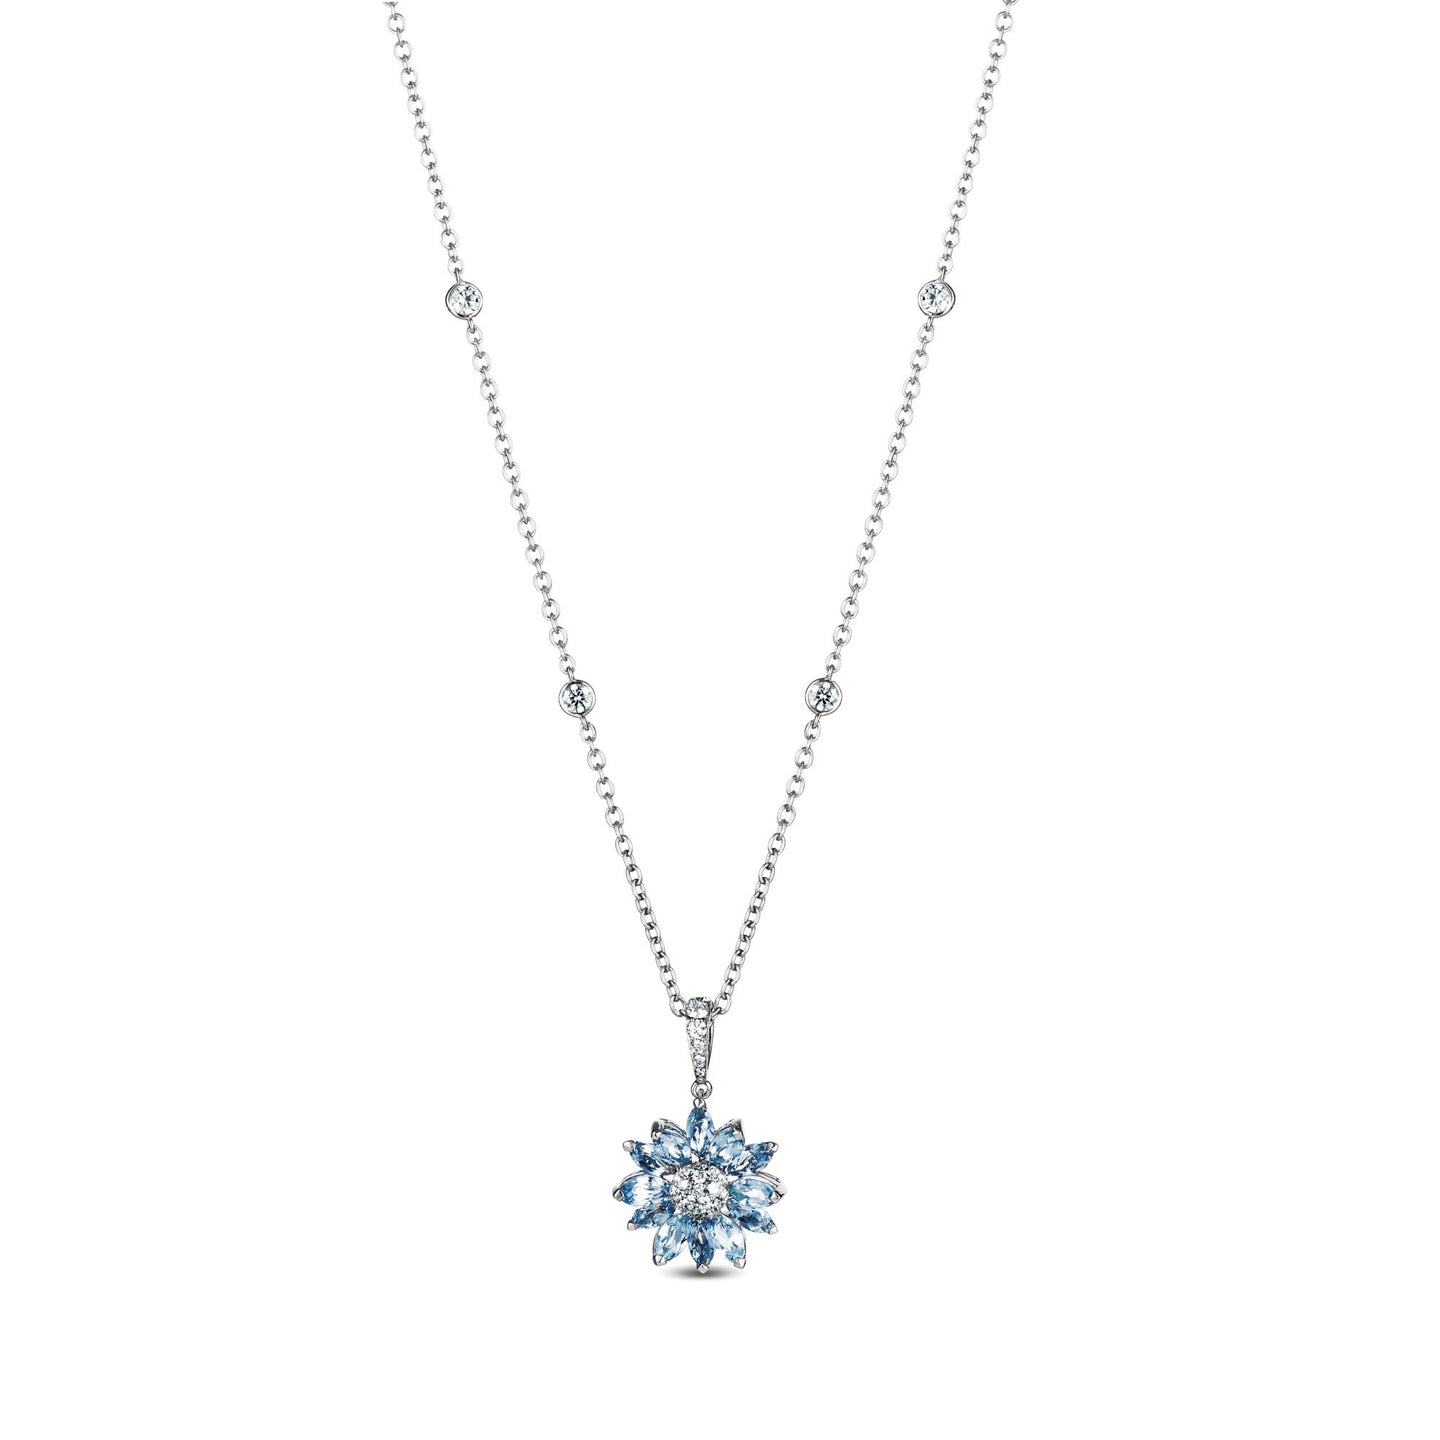 Daisy Pendant in 18ct White Gold with Aquamarine and Diamonds